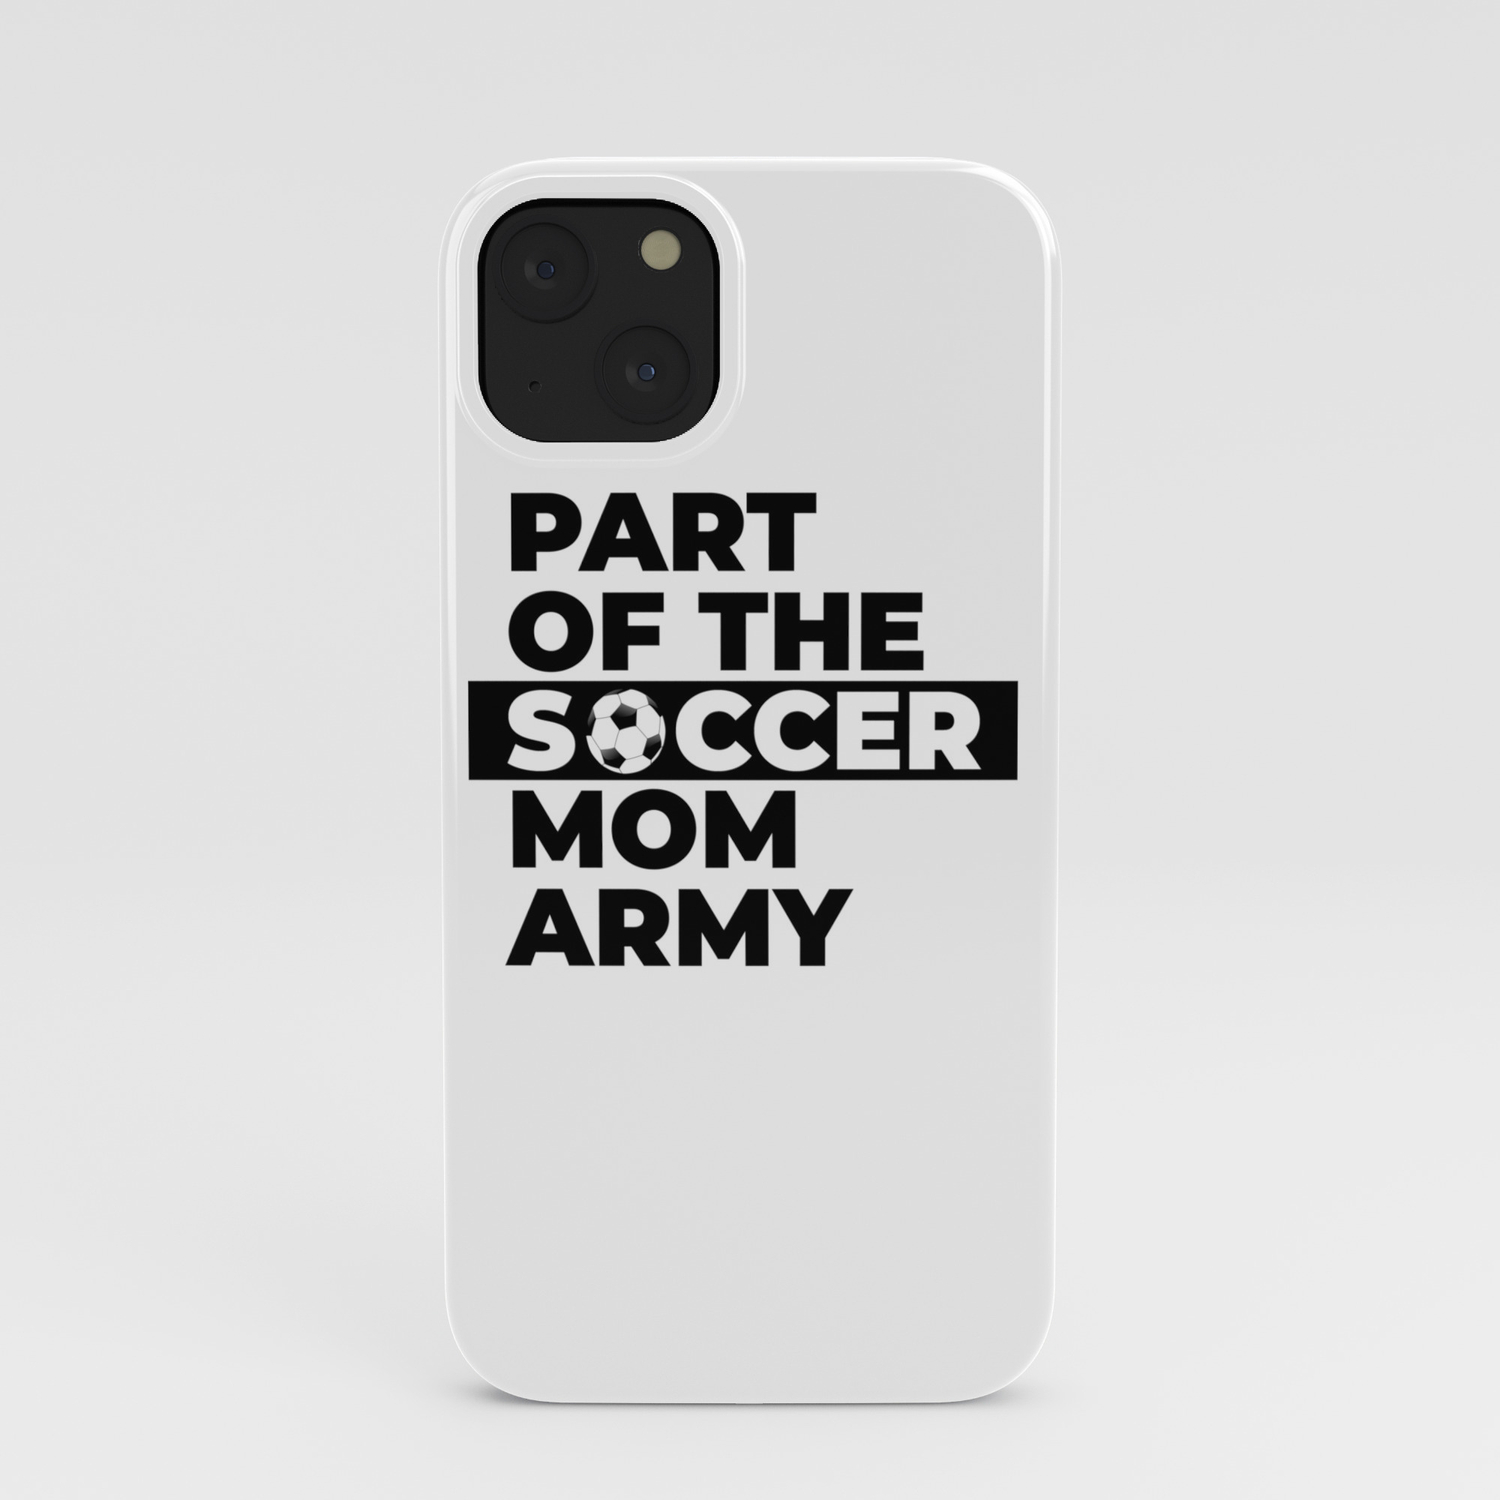 Funny Part of the soccer mom army gift idea iPhone Case by Lunaco | Society6